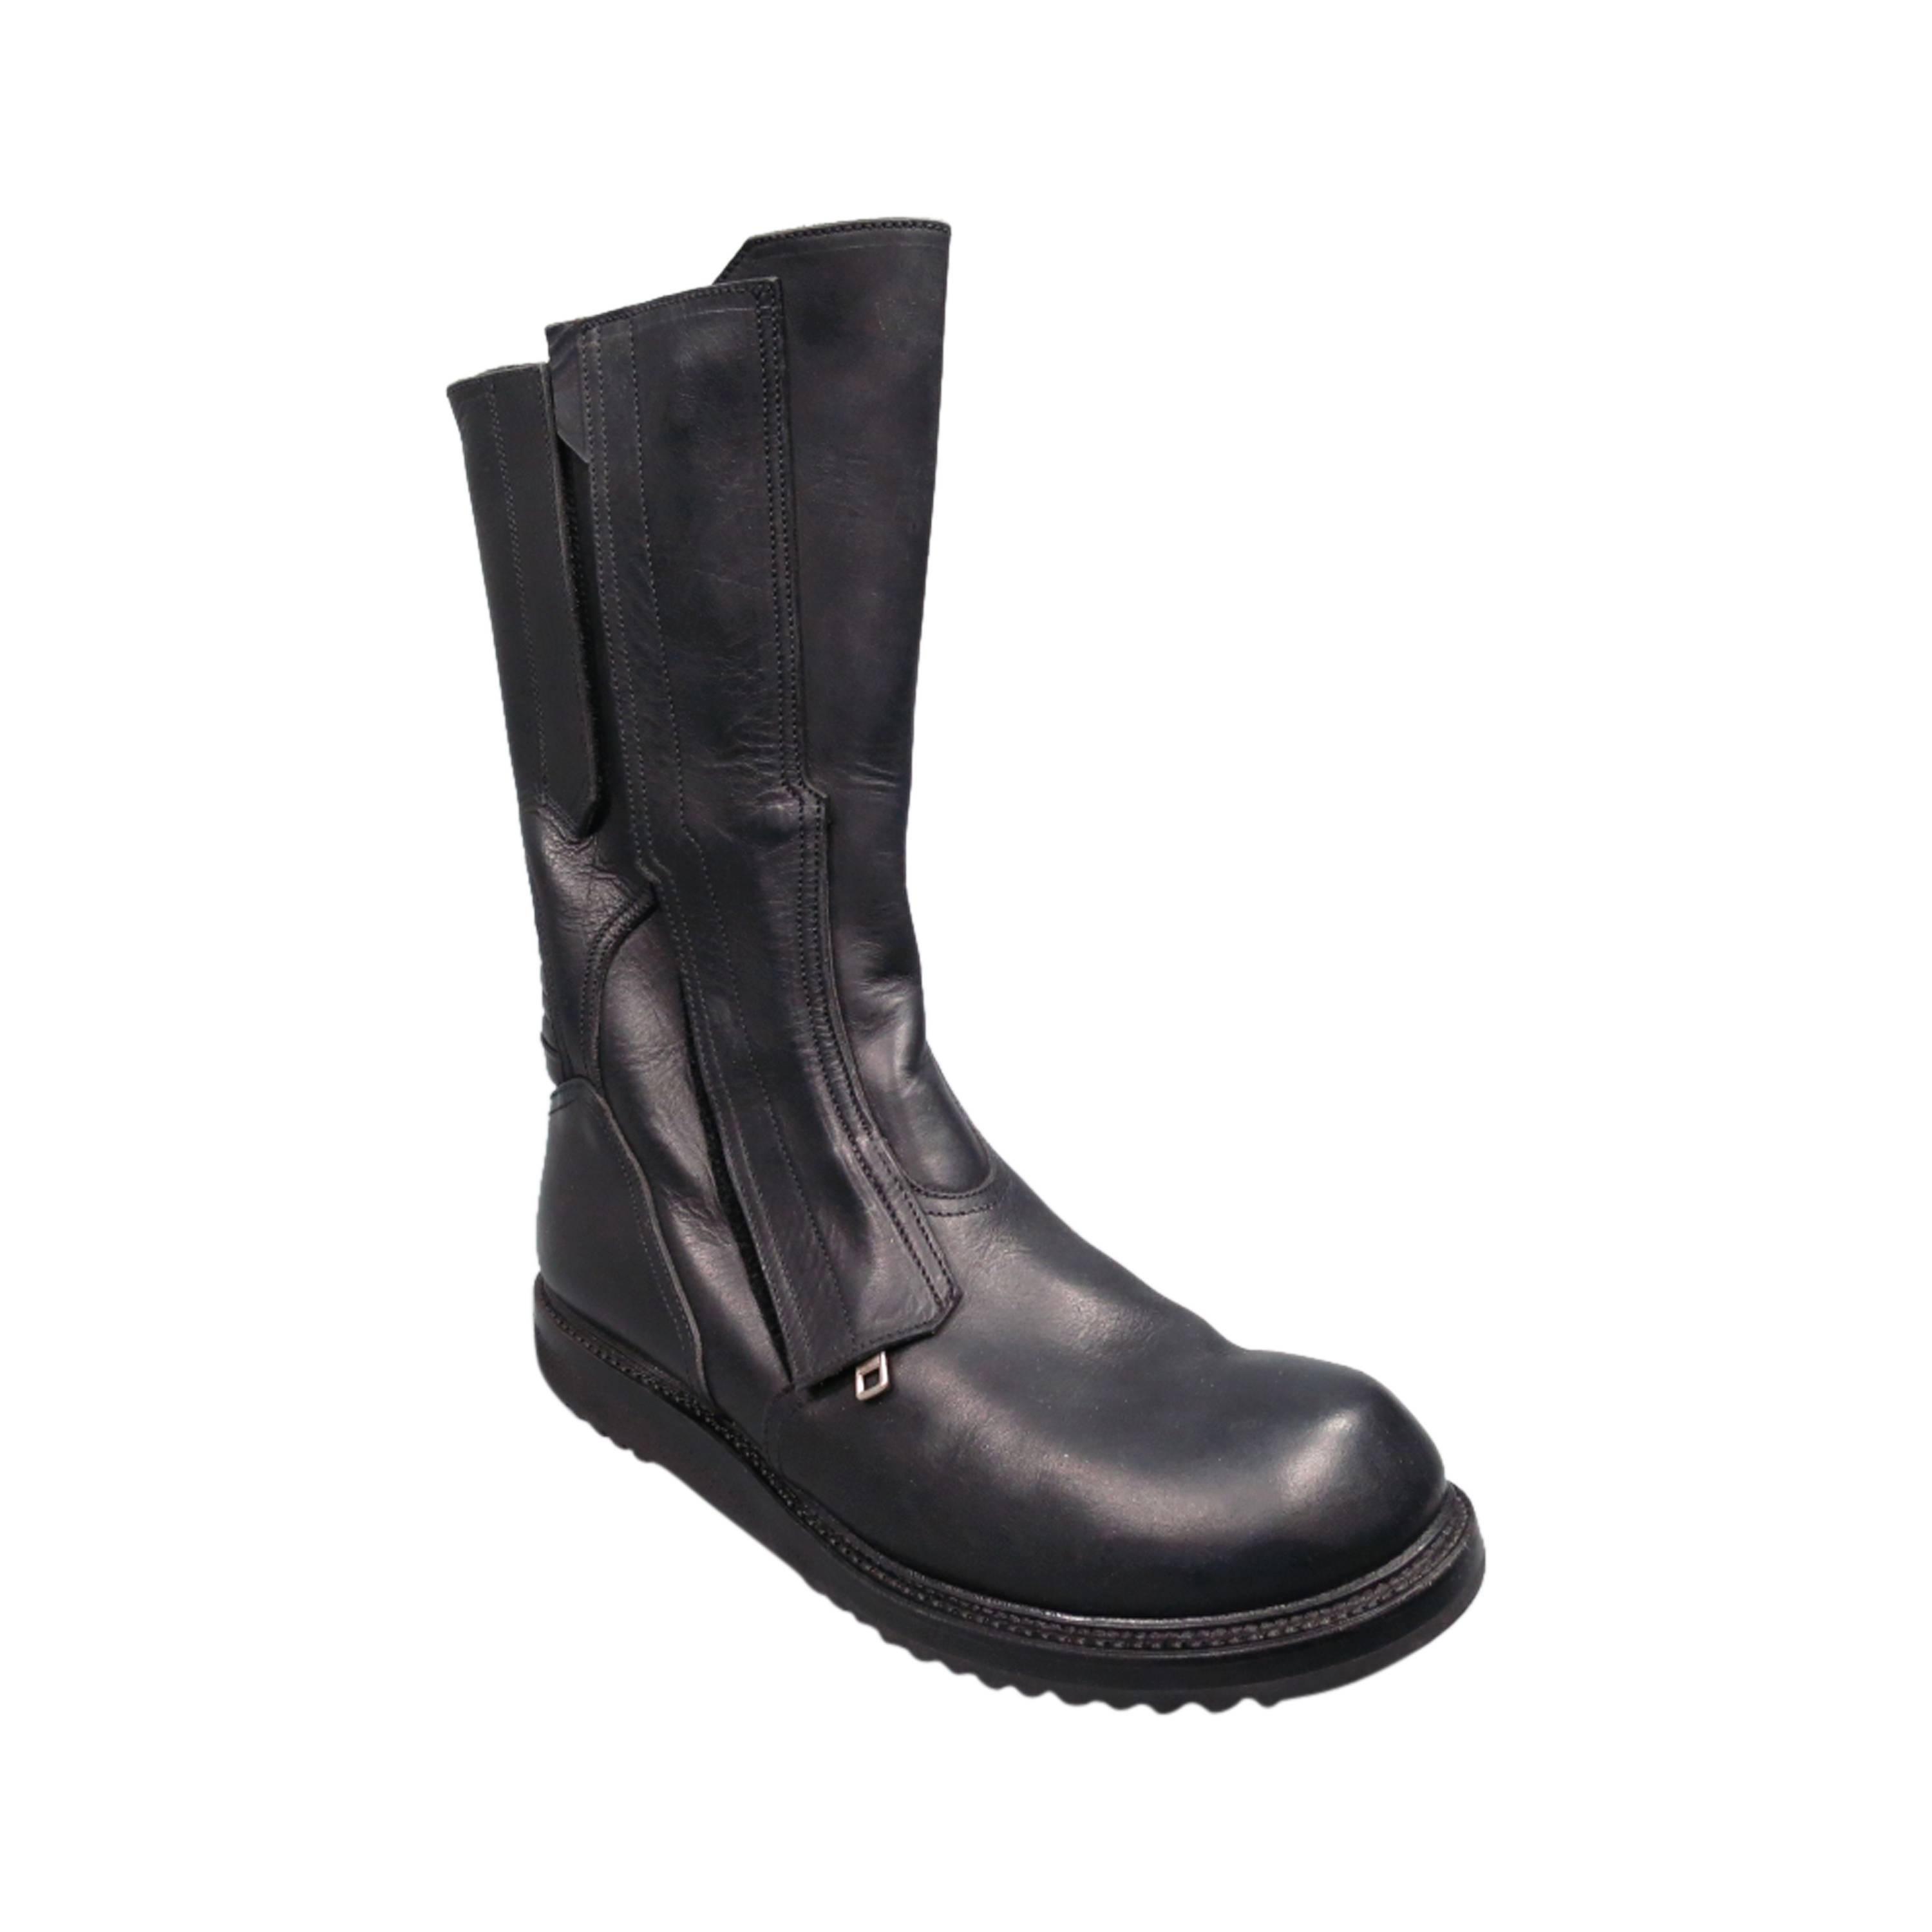 RICK OWENS Size 10.5 Black Leather Tall Zip Boots